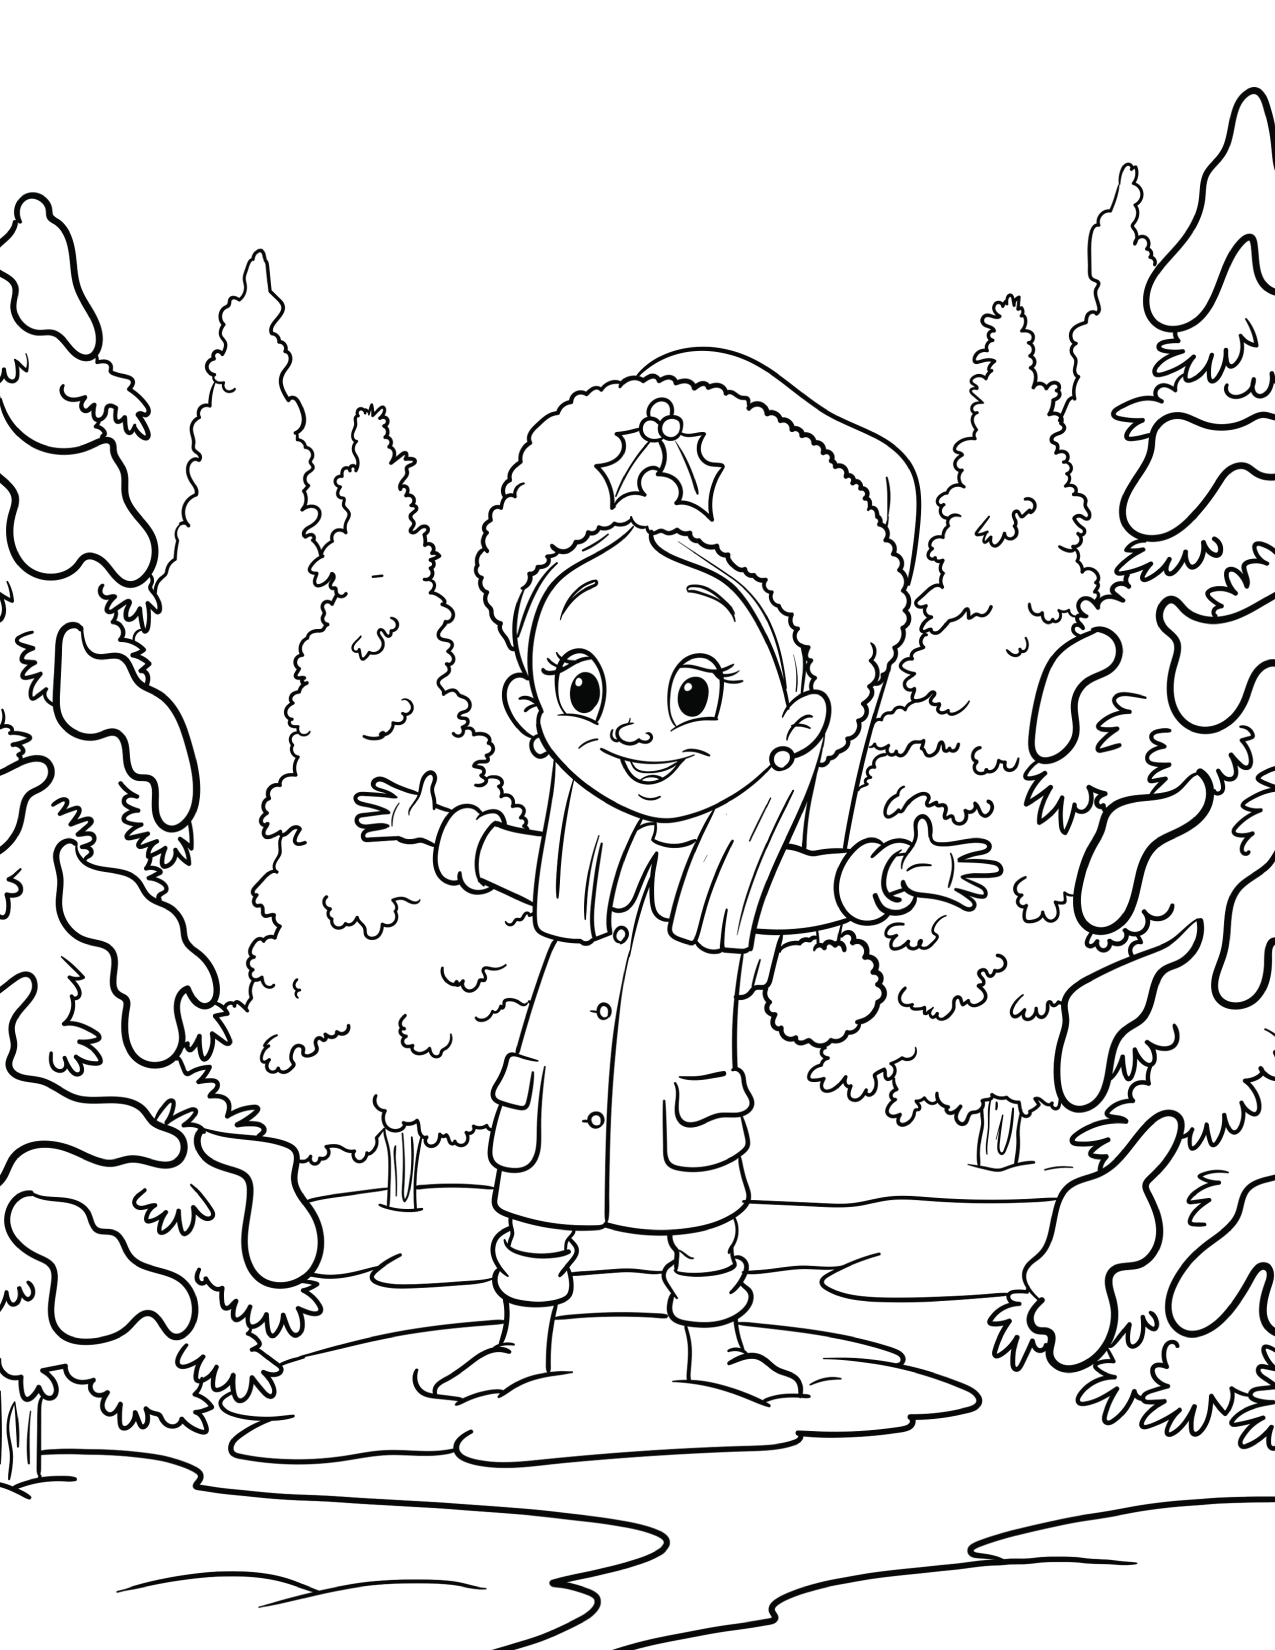 Free Christmas Coloring Pages! ⋆ The Hollydog Blog